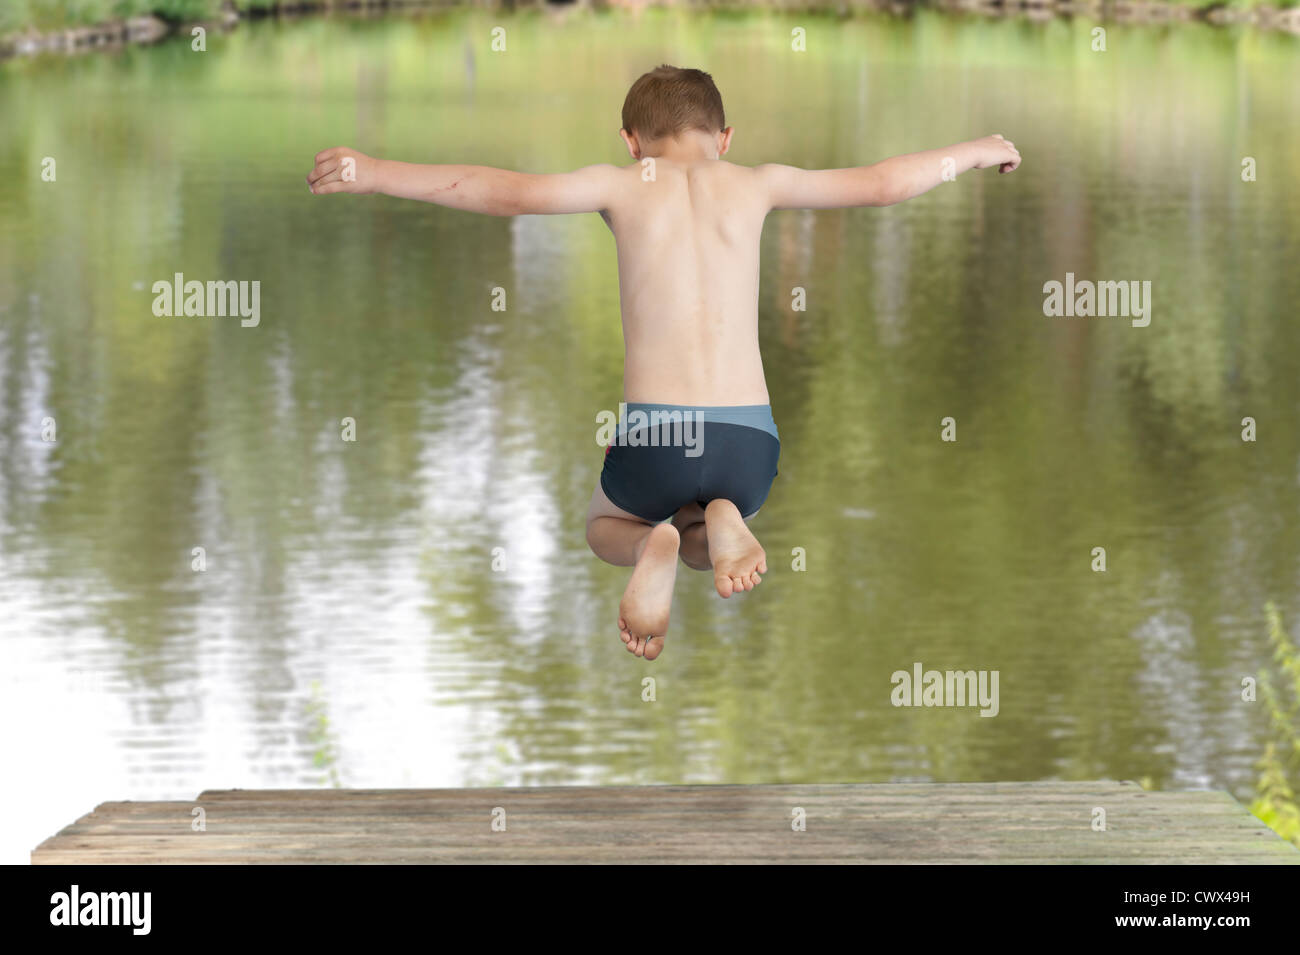 boy jumping in a lake, back view Stock Photo